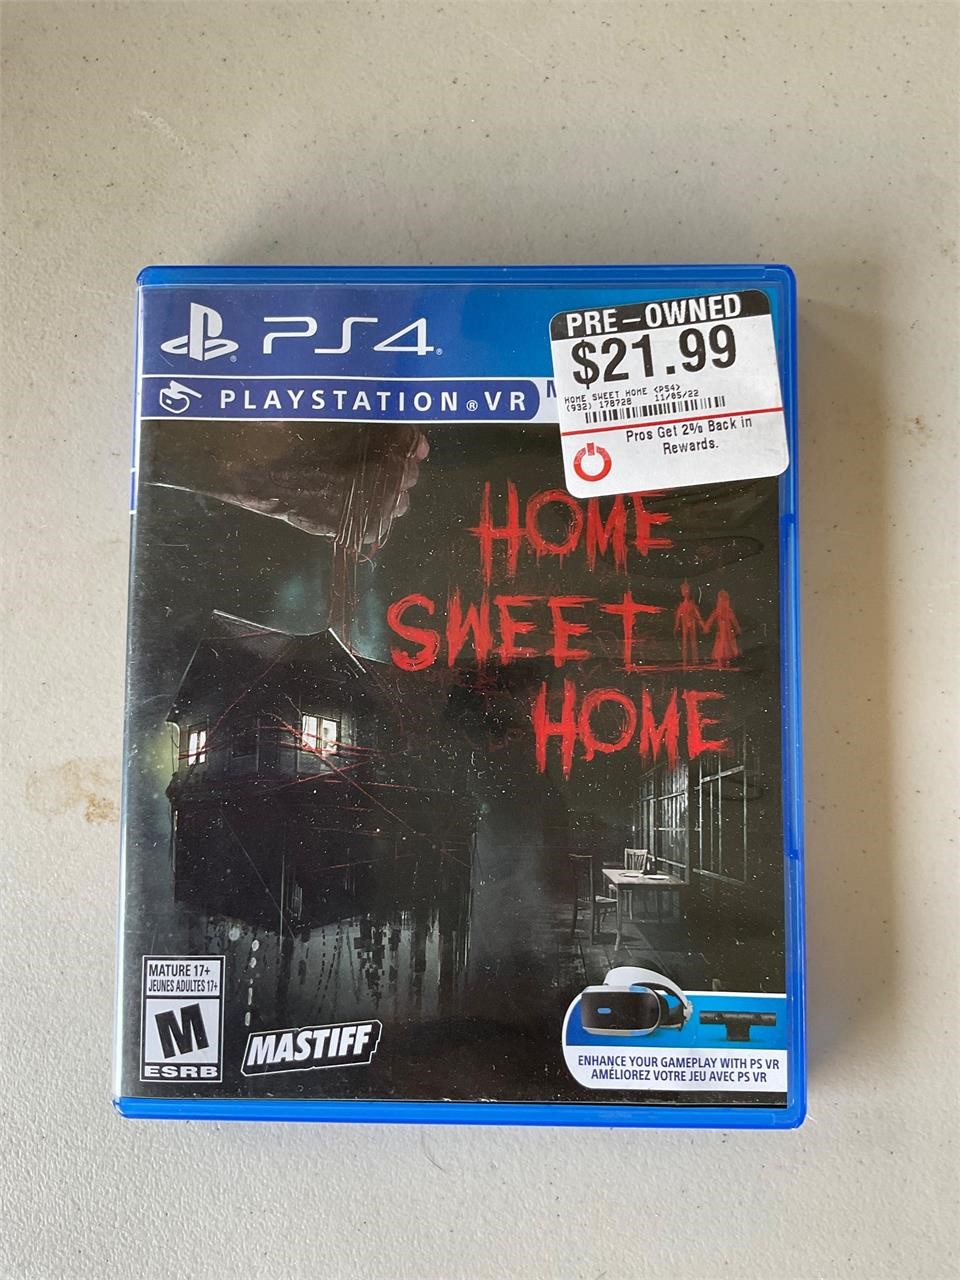 PS4 game home Sweet home